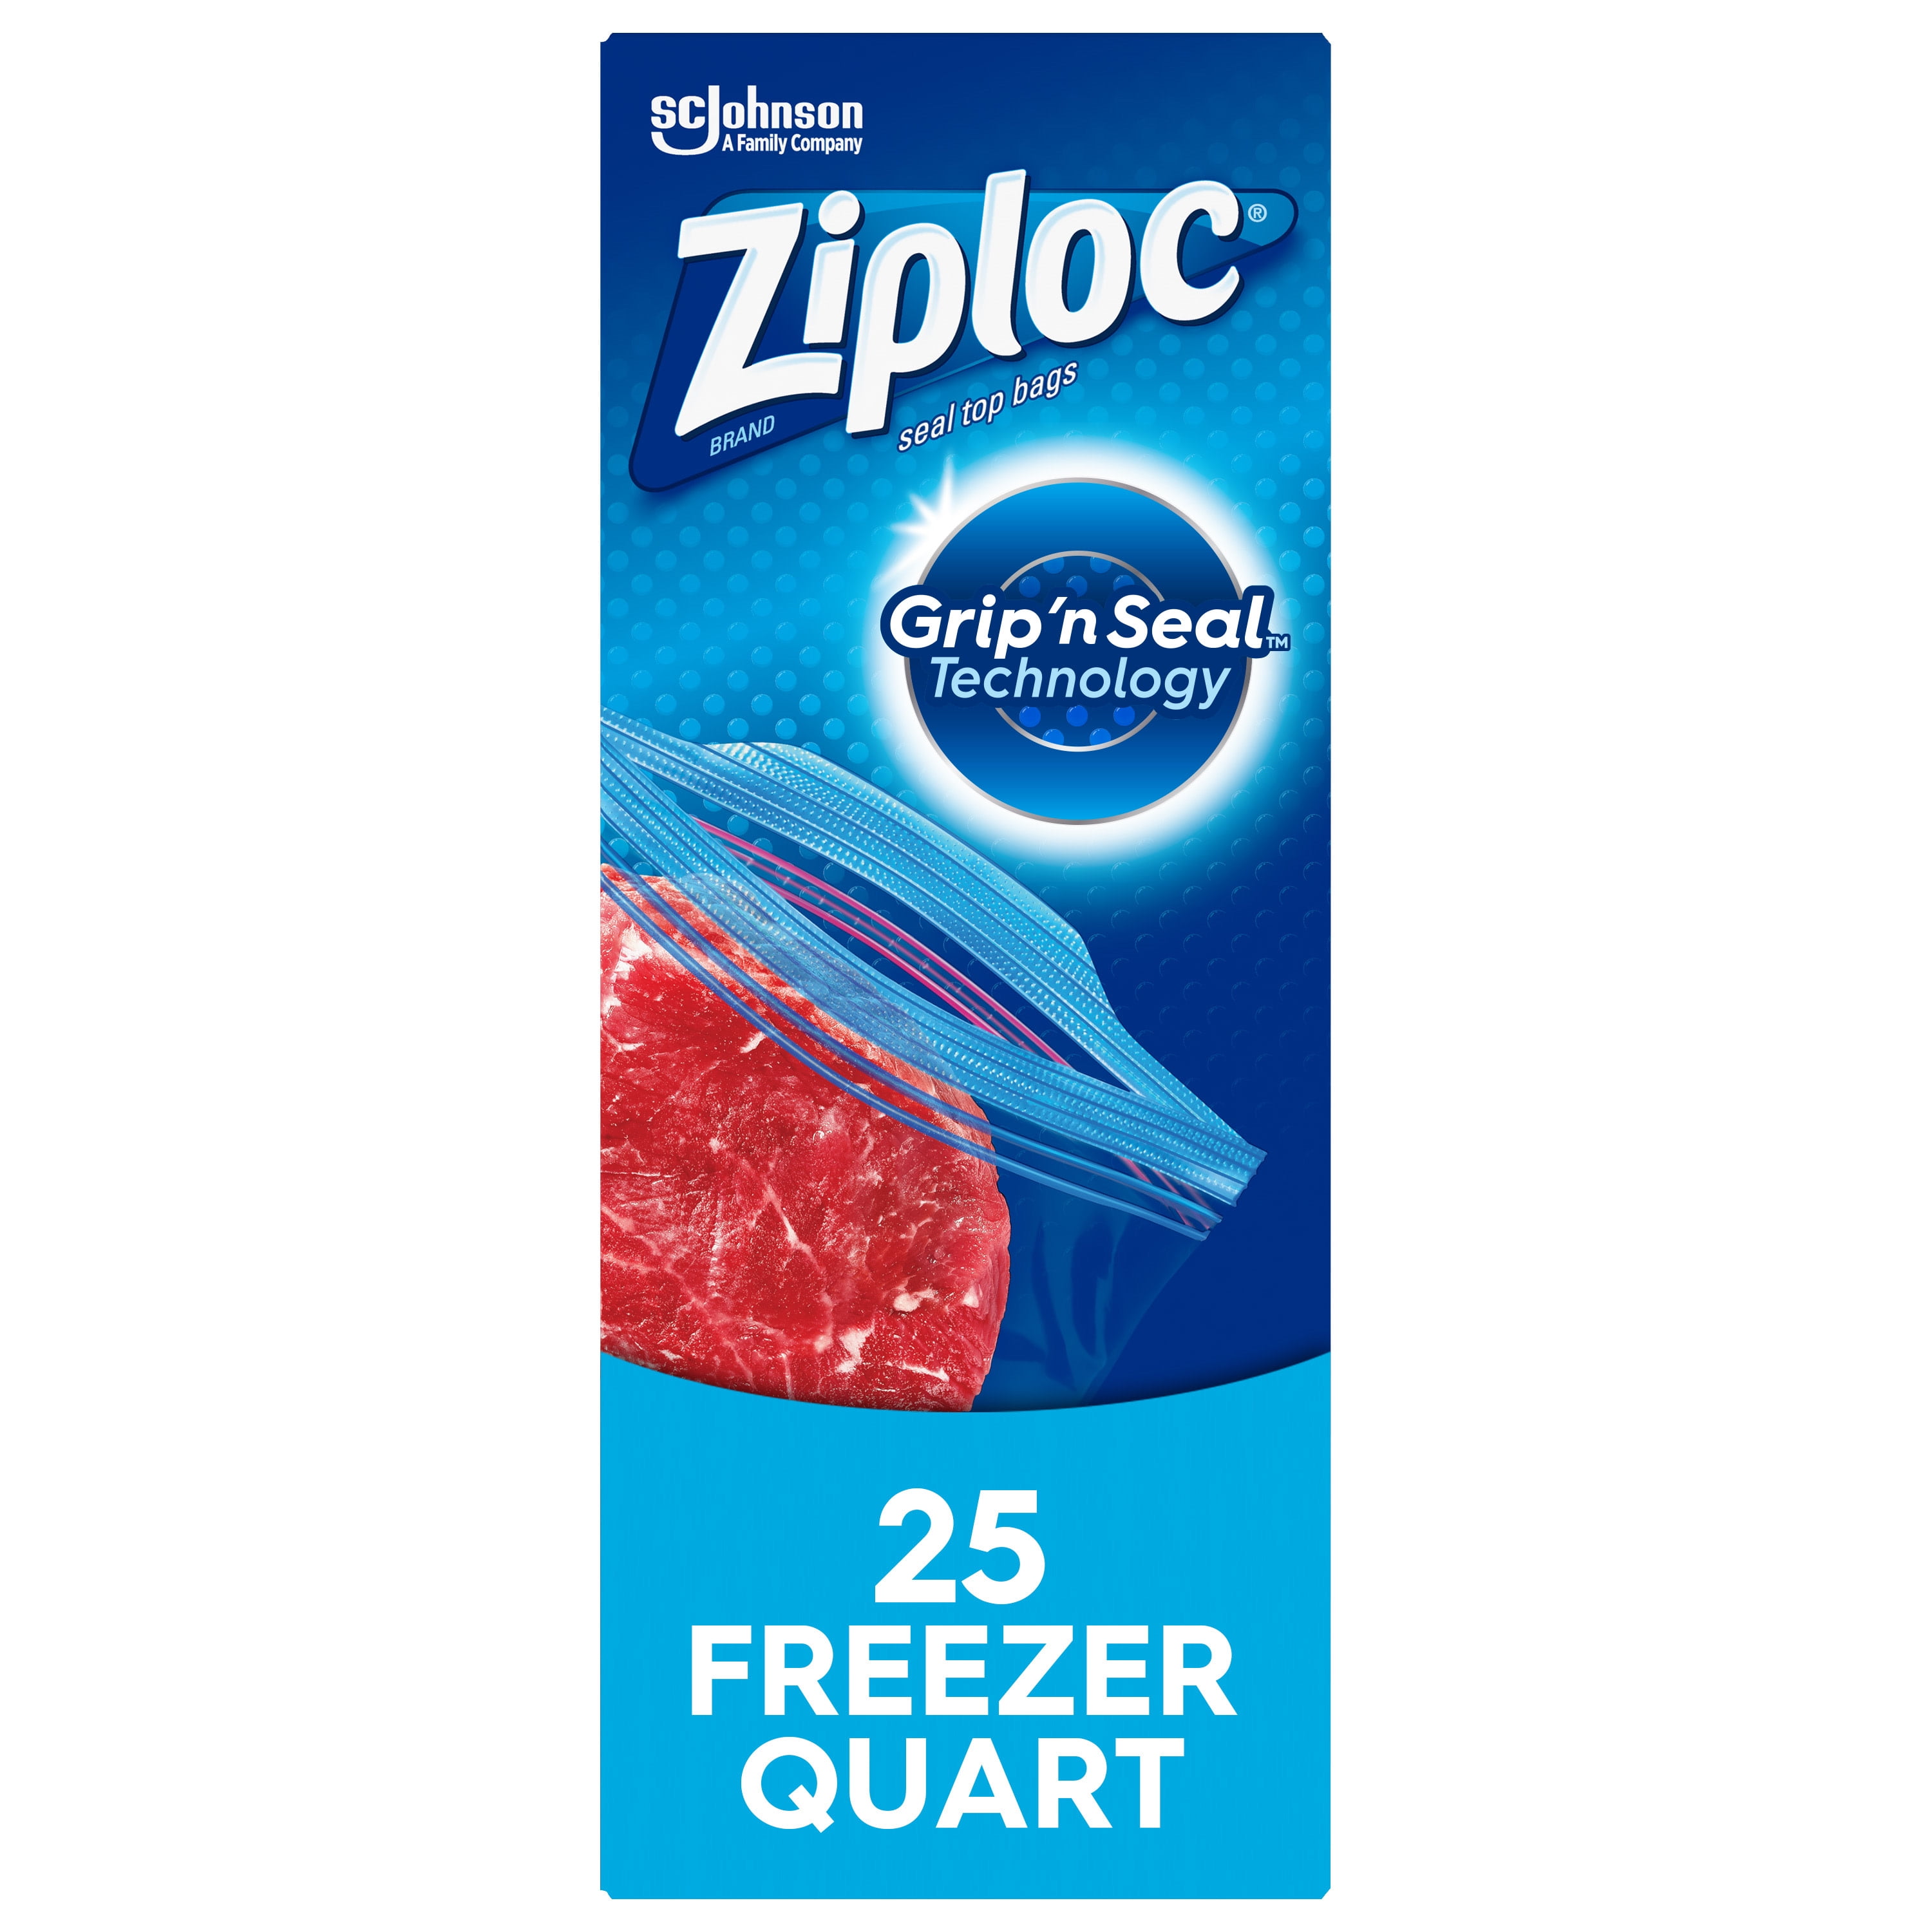 Ziploc® Brand Freezer Bags with Grip 'n Seal Technology, Quart, 25 Count